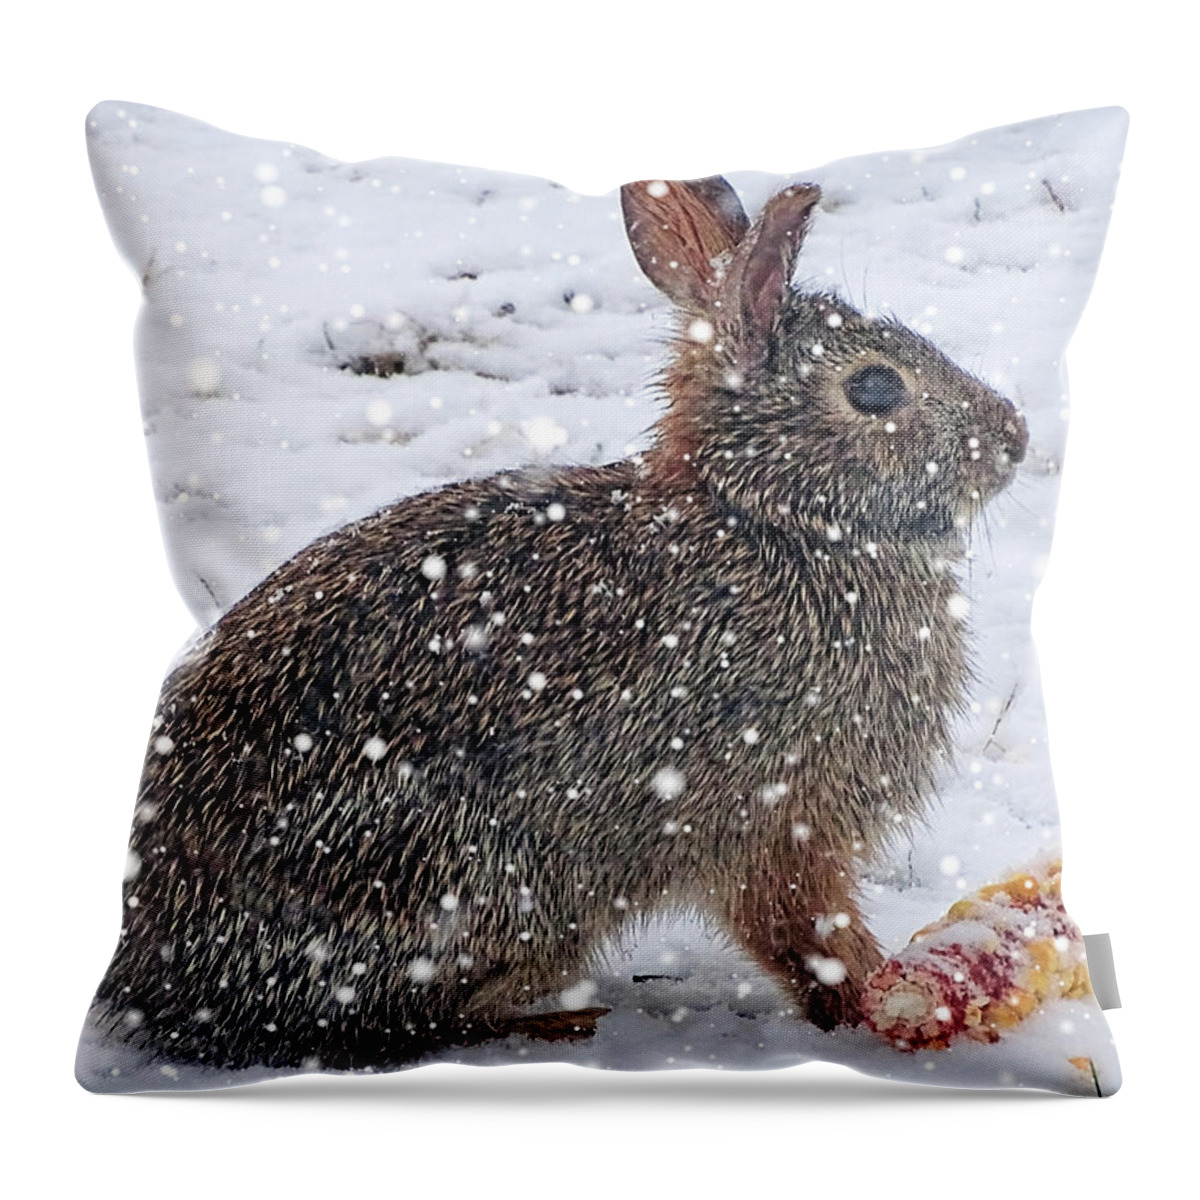 Bunny Throw Pillow featuring the photograph Snow Bunny by Theresa Campbell